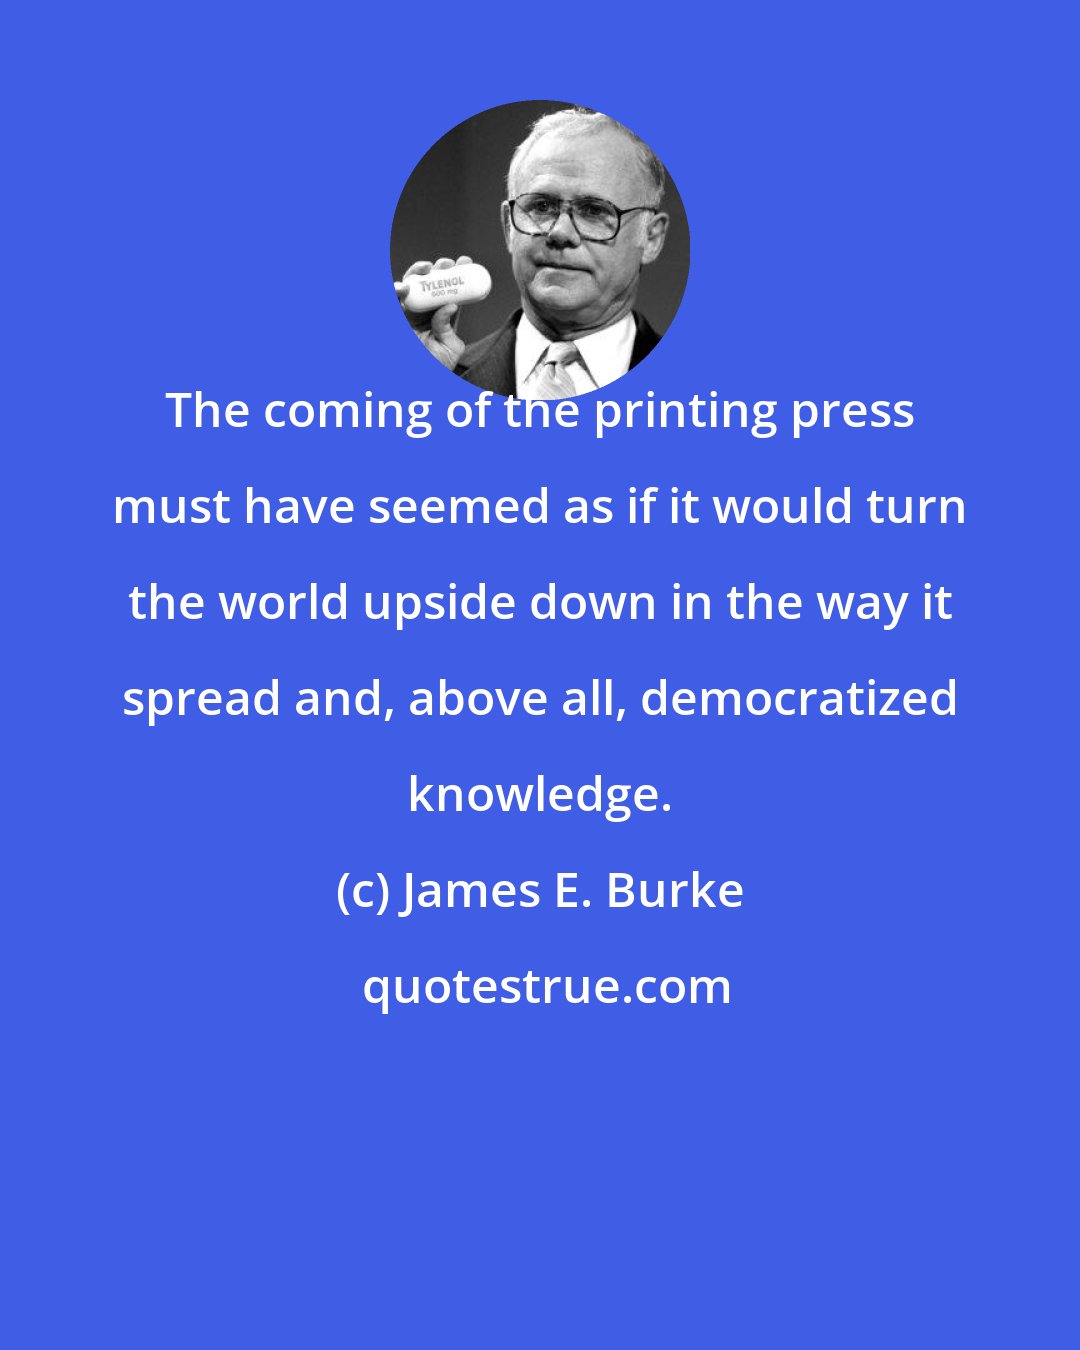 James E. Burke: The coming of the printing press must have seemed as if it would turn the world upside down in the way it spread and, above all, democratized knowledge.